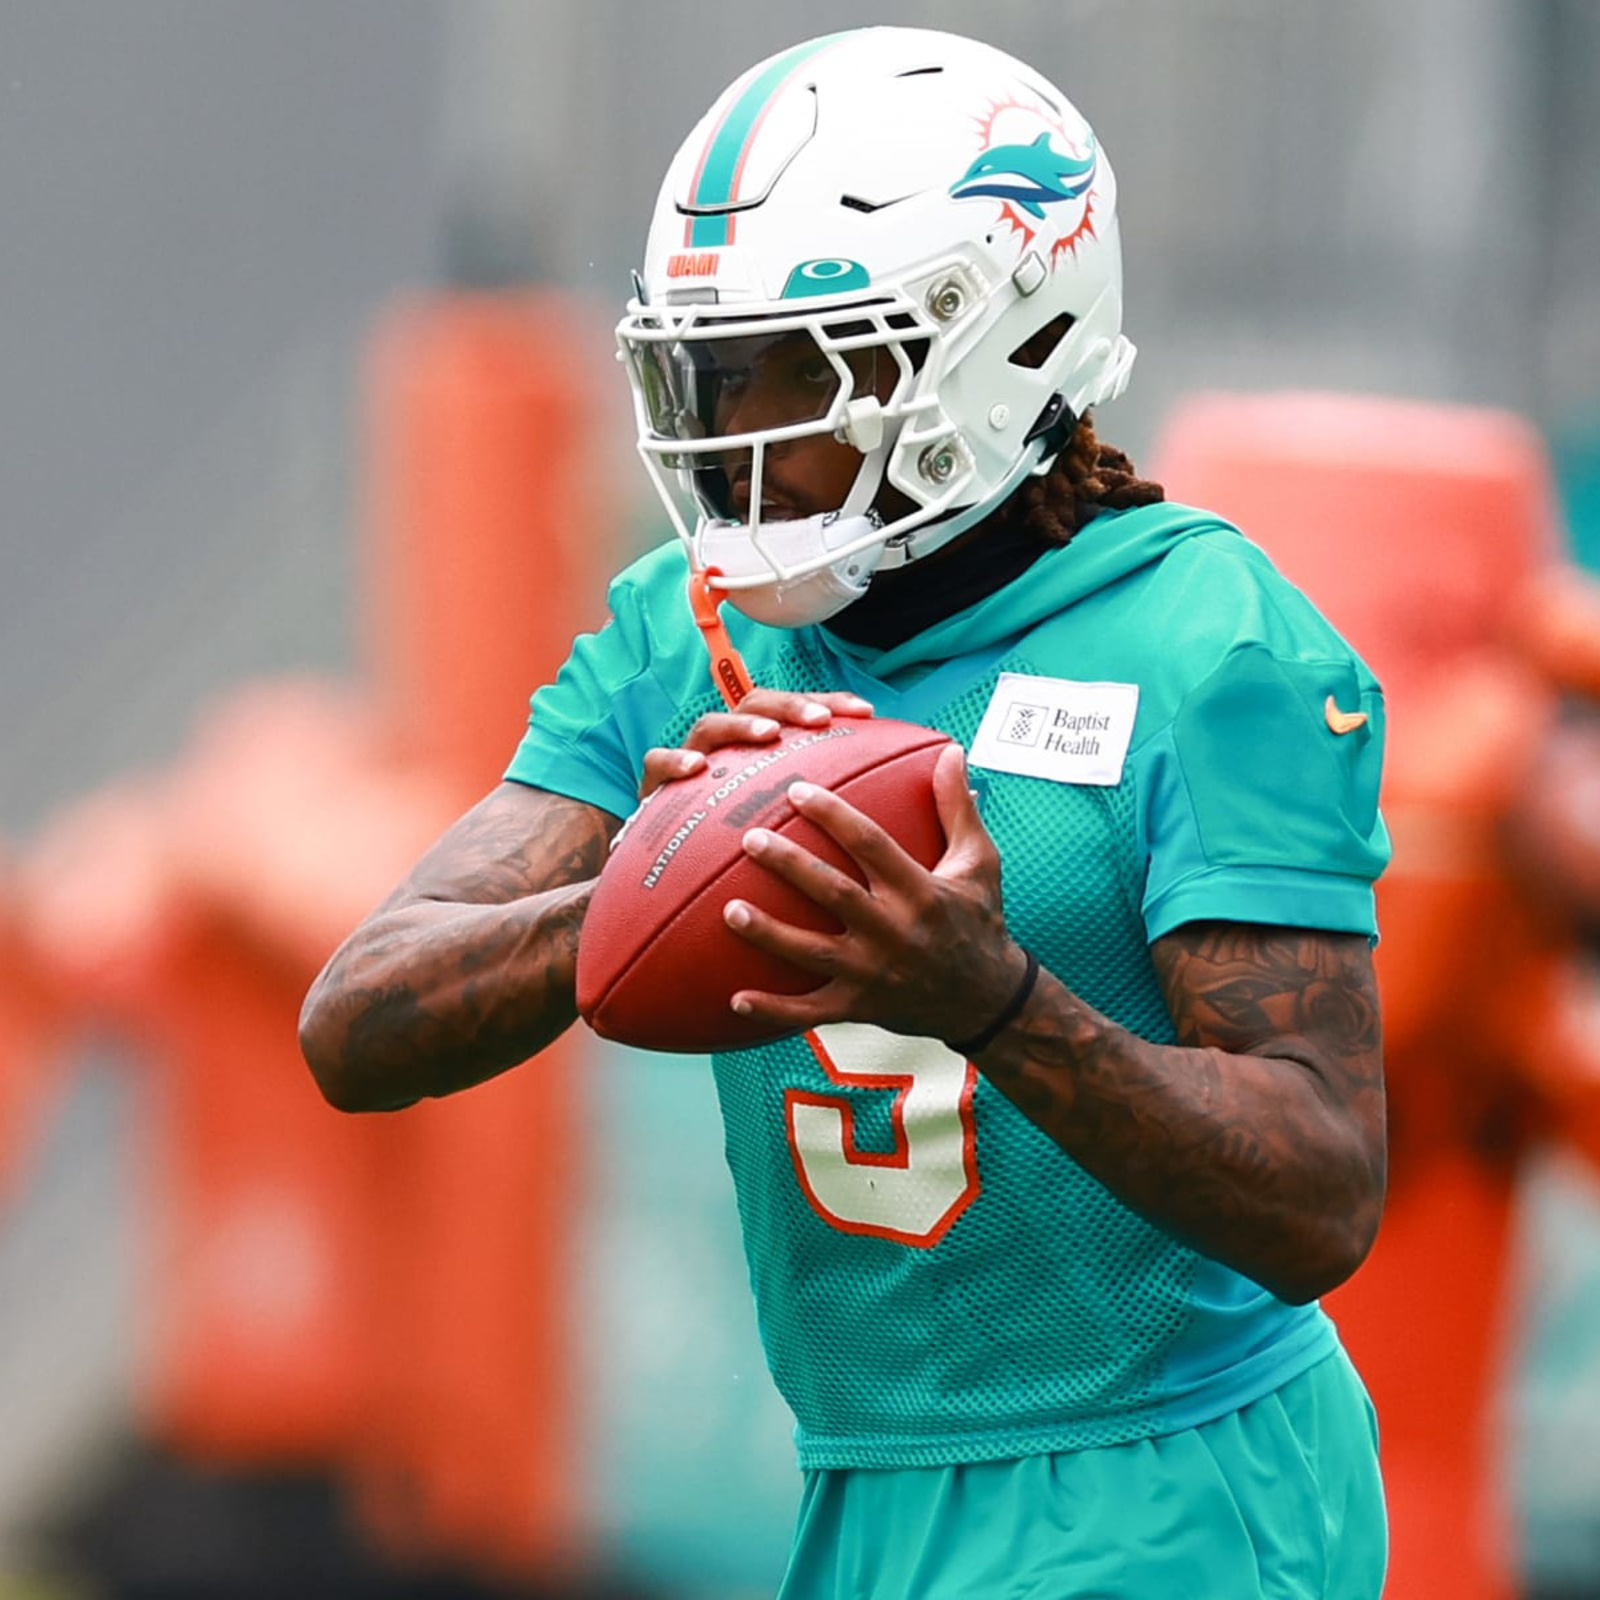 Report: Dolphins' Ramsey out until December after full meniscus